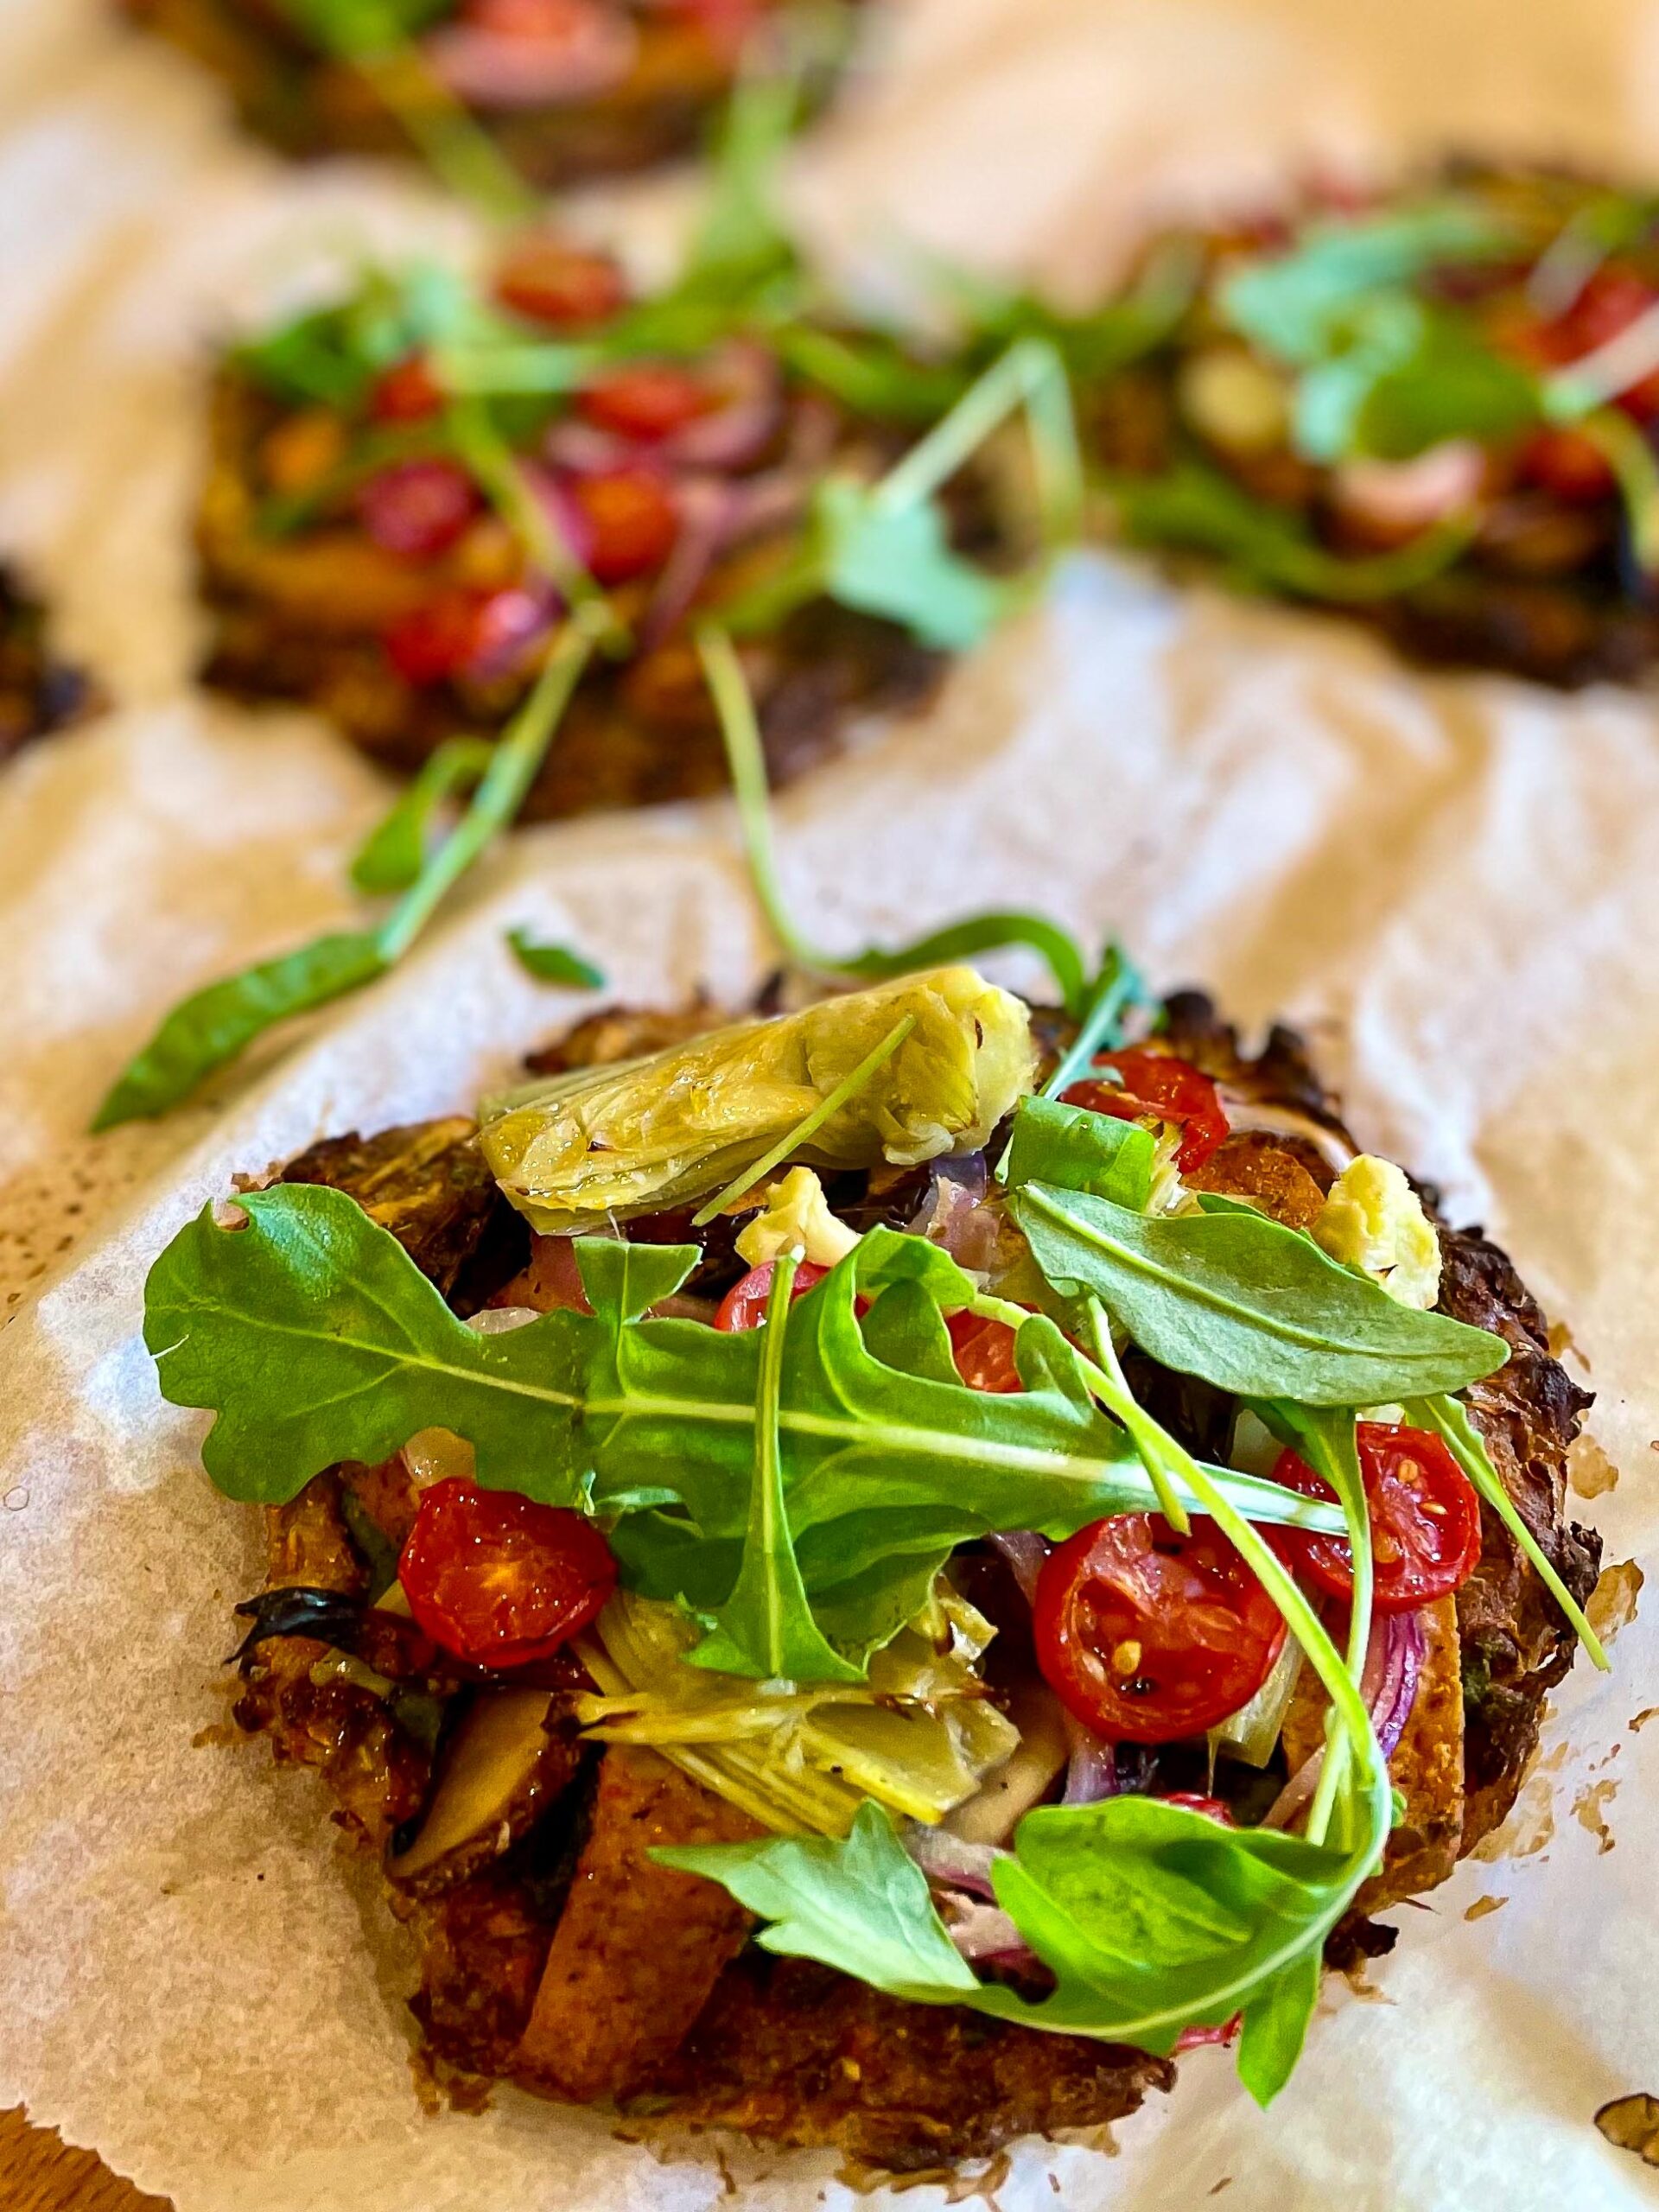 alt="a close-up of a mini root vegetable pizza topped with smoked tofu, cherry tomatoes, artochoke hearts and arugula."